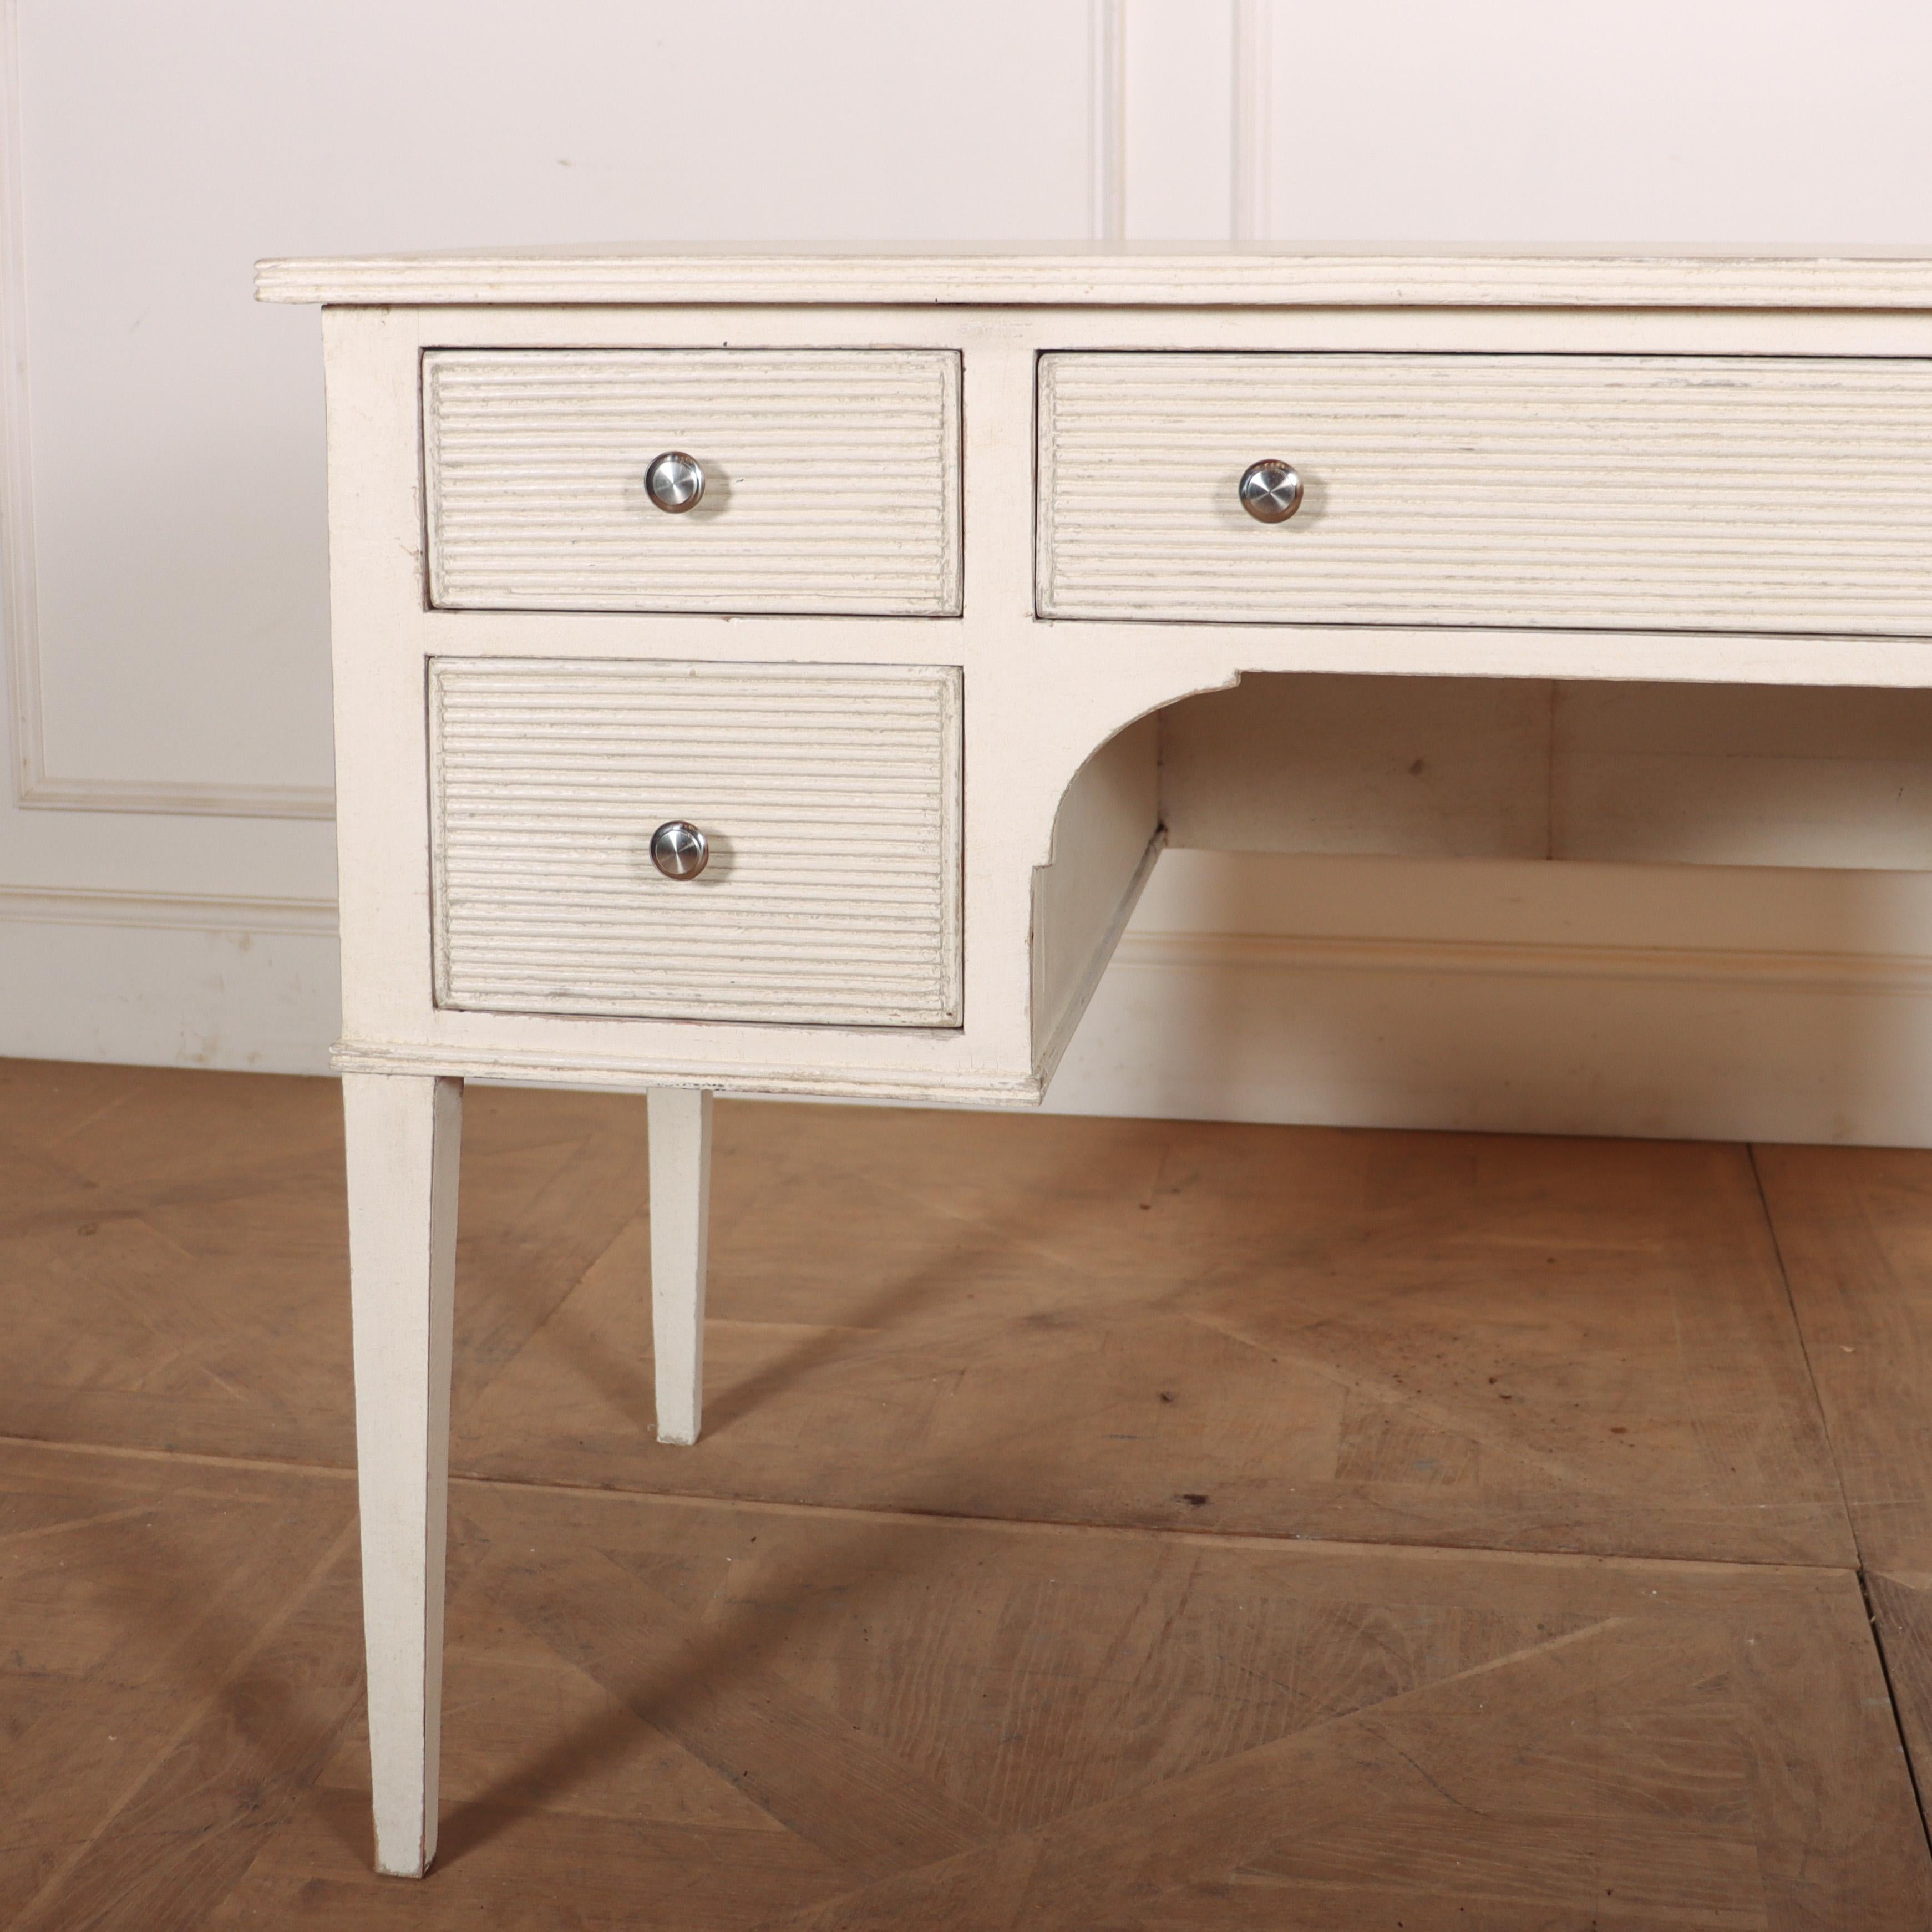 Custom build Swedish style five drawer dressing table / kneehole desk. Can be made to your chosen dimensions and paint colour.

Kneehole dimensions: 20